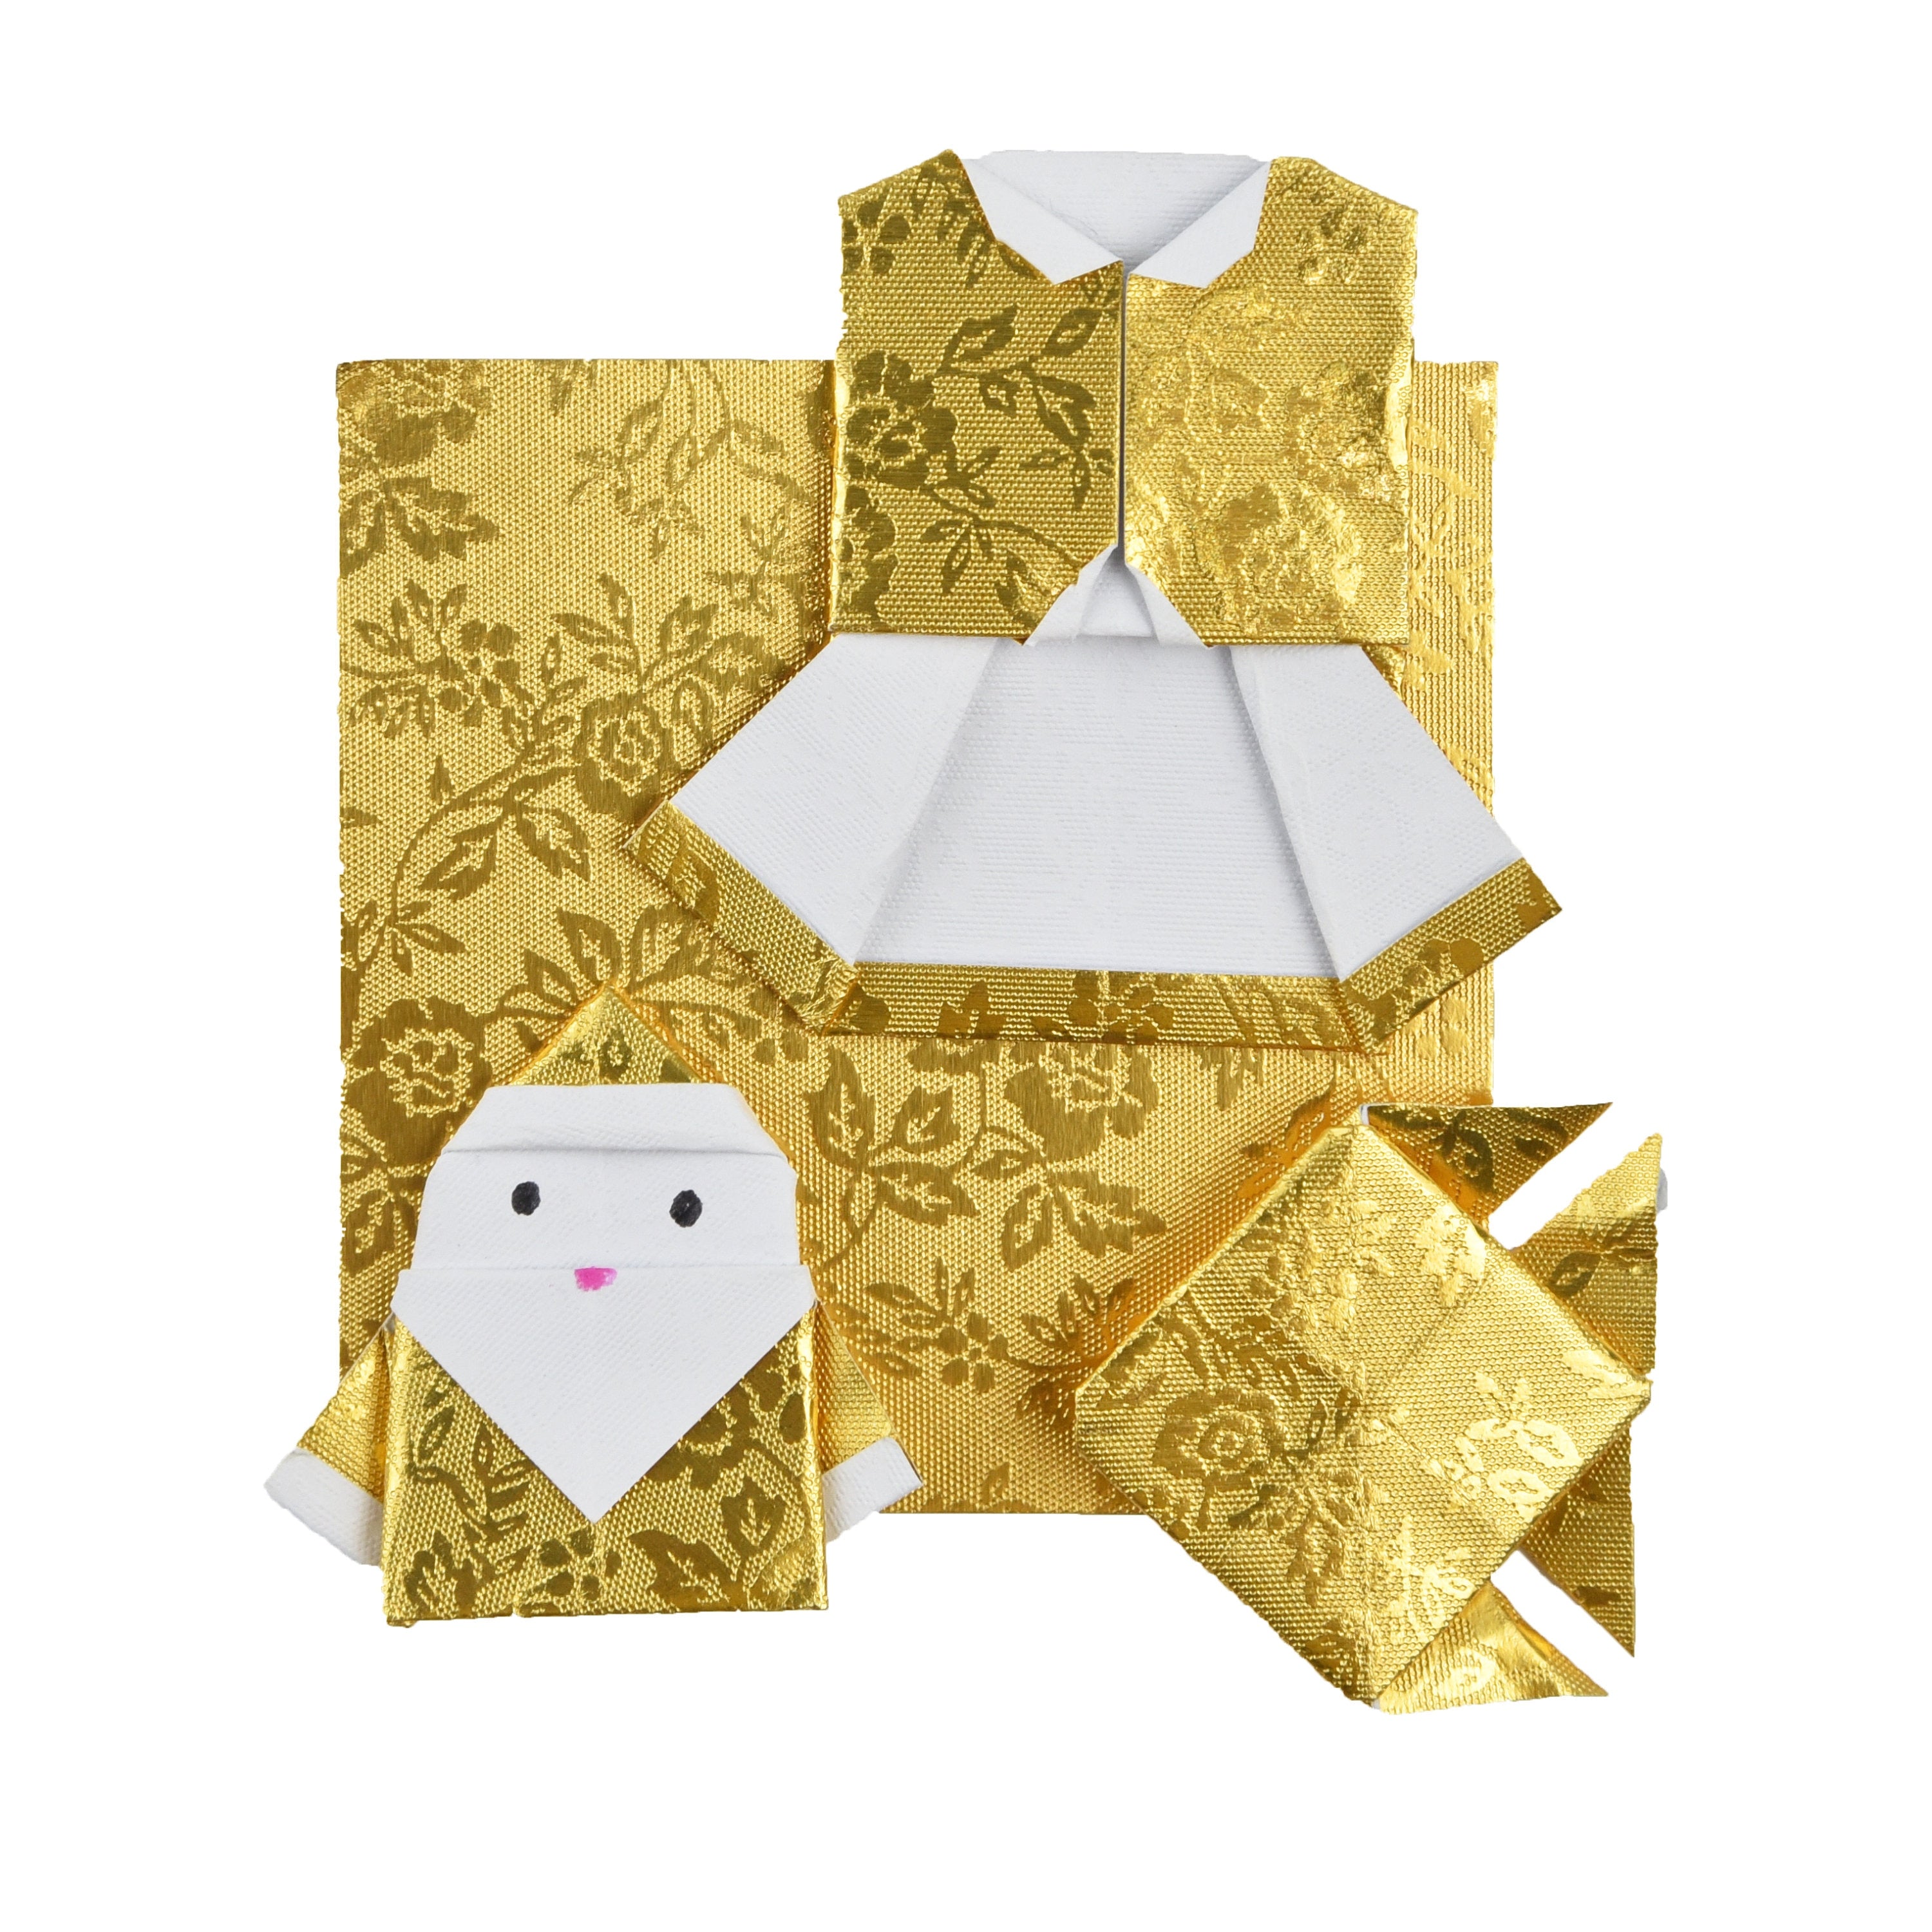 100 Gold Origami Paper Sheets 6x6 inches for Folding Paper, Origami Cranes, Origami Decoration